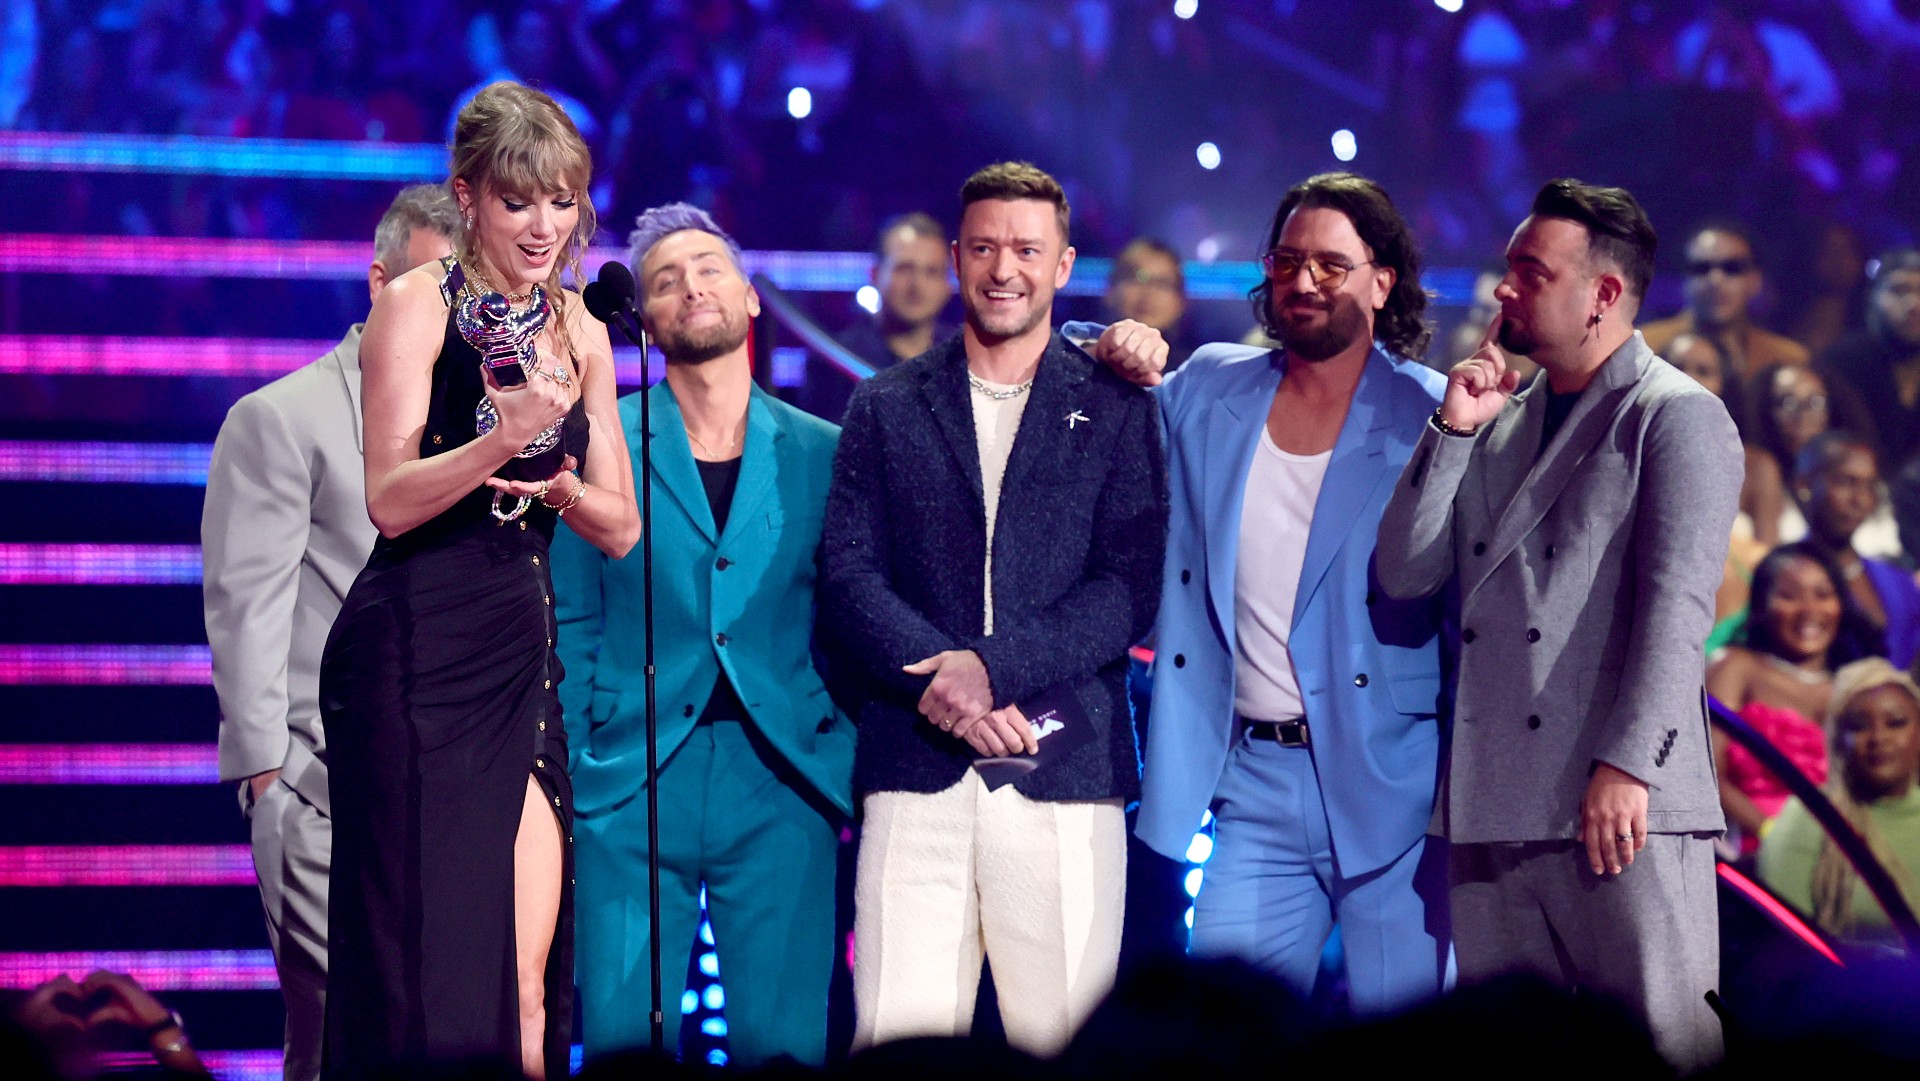 The daily gossip Taylor Swift fangirls over NSYNC as she dominates the